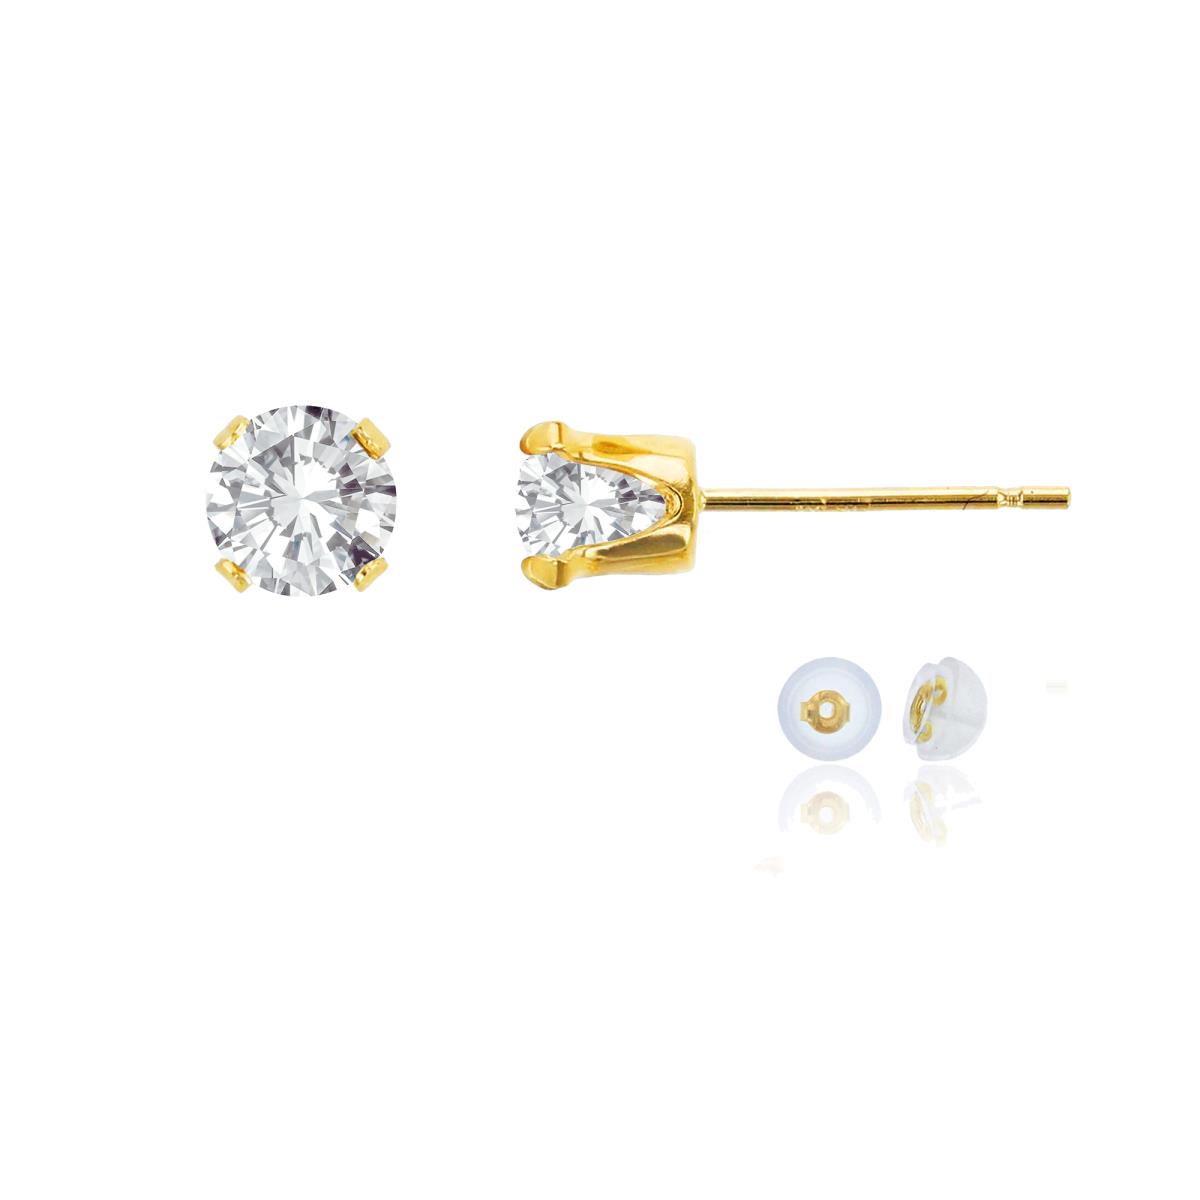 10K Yellow Gold 5mm Round White Topaz Stud Earring with Silicone Back